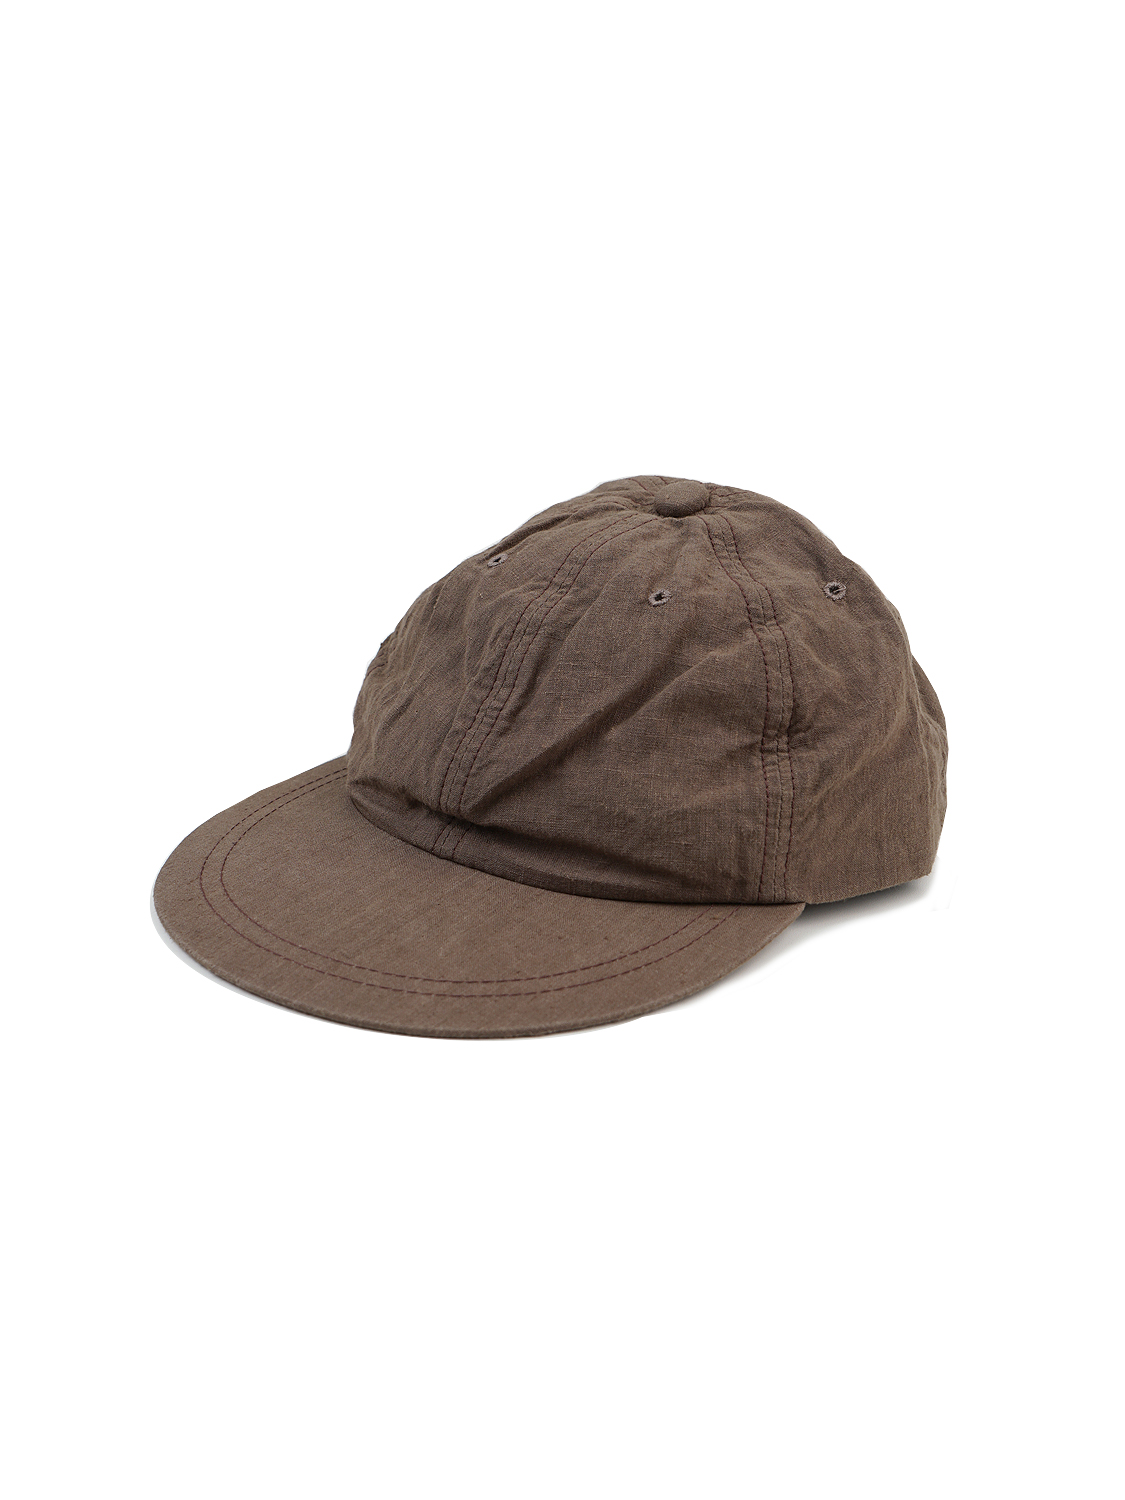 ENDS and MEANS 6panels cap (brown)